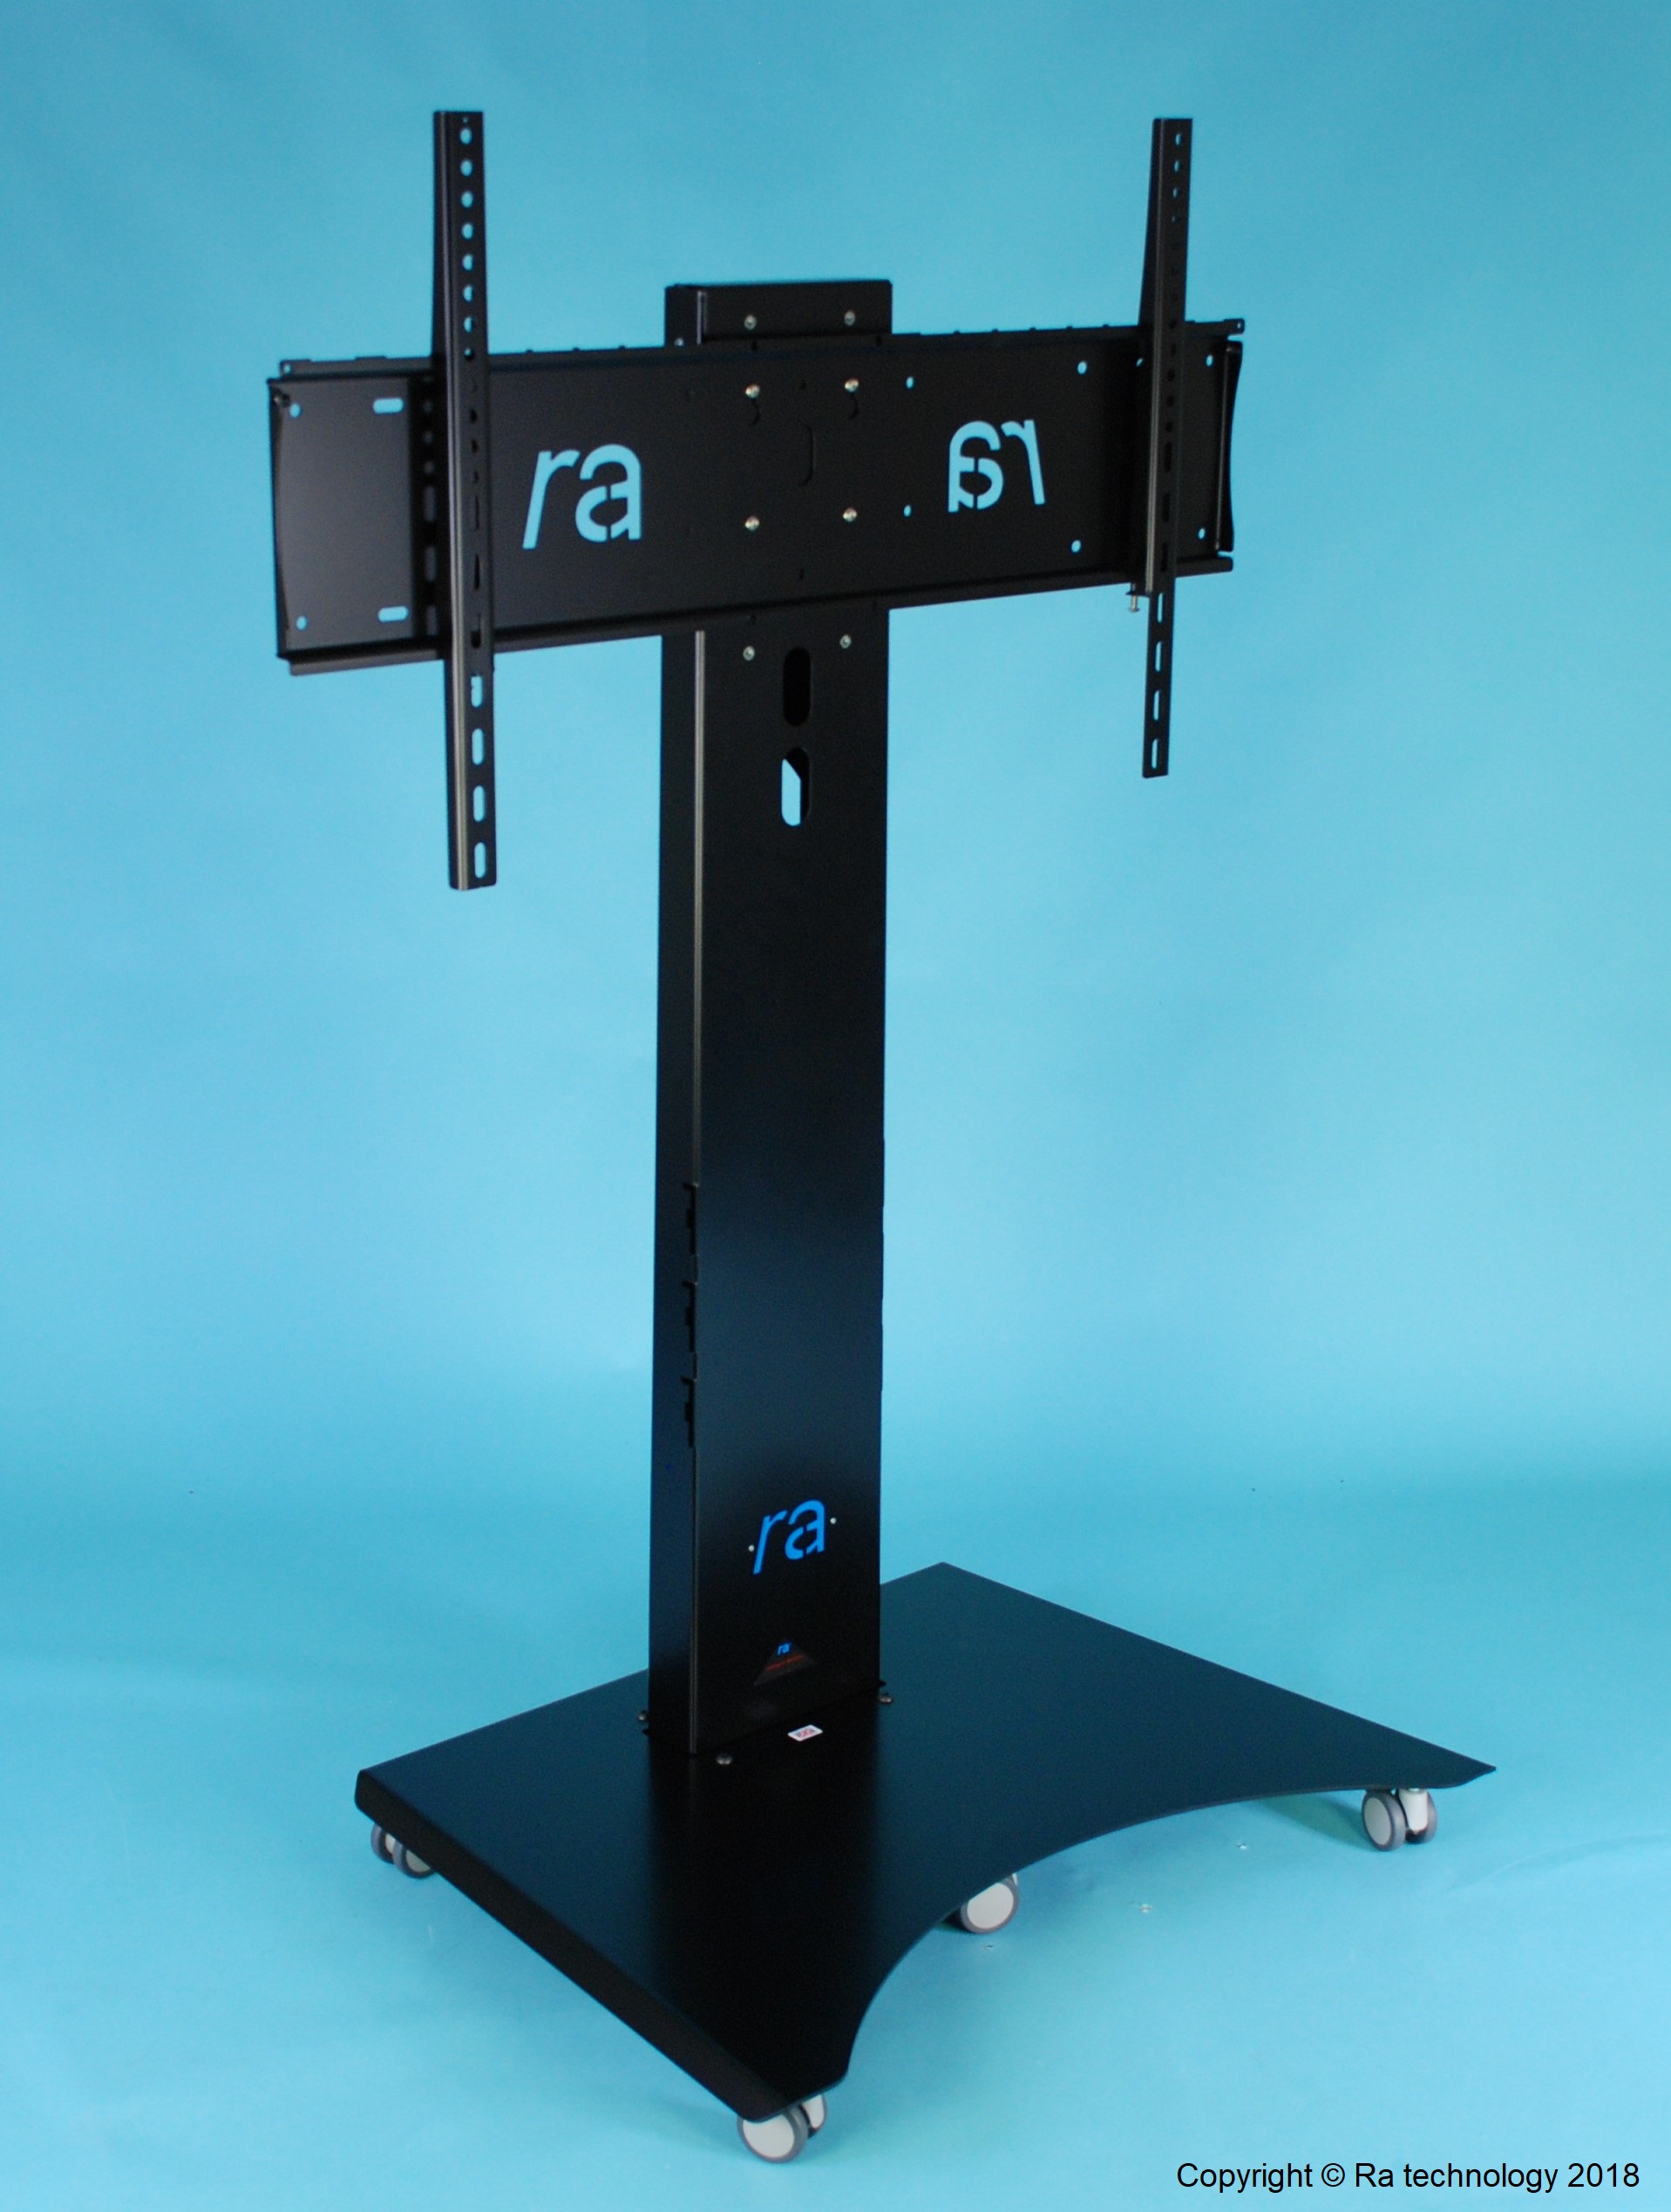 RA Atlas Manta-4-Mobile. Fixed Height Trolley. Screens up to 98"